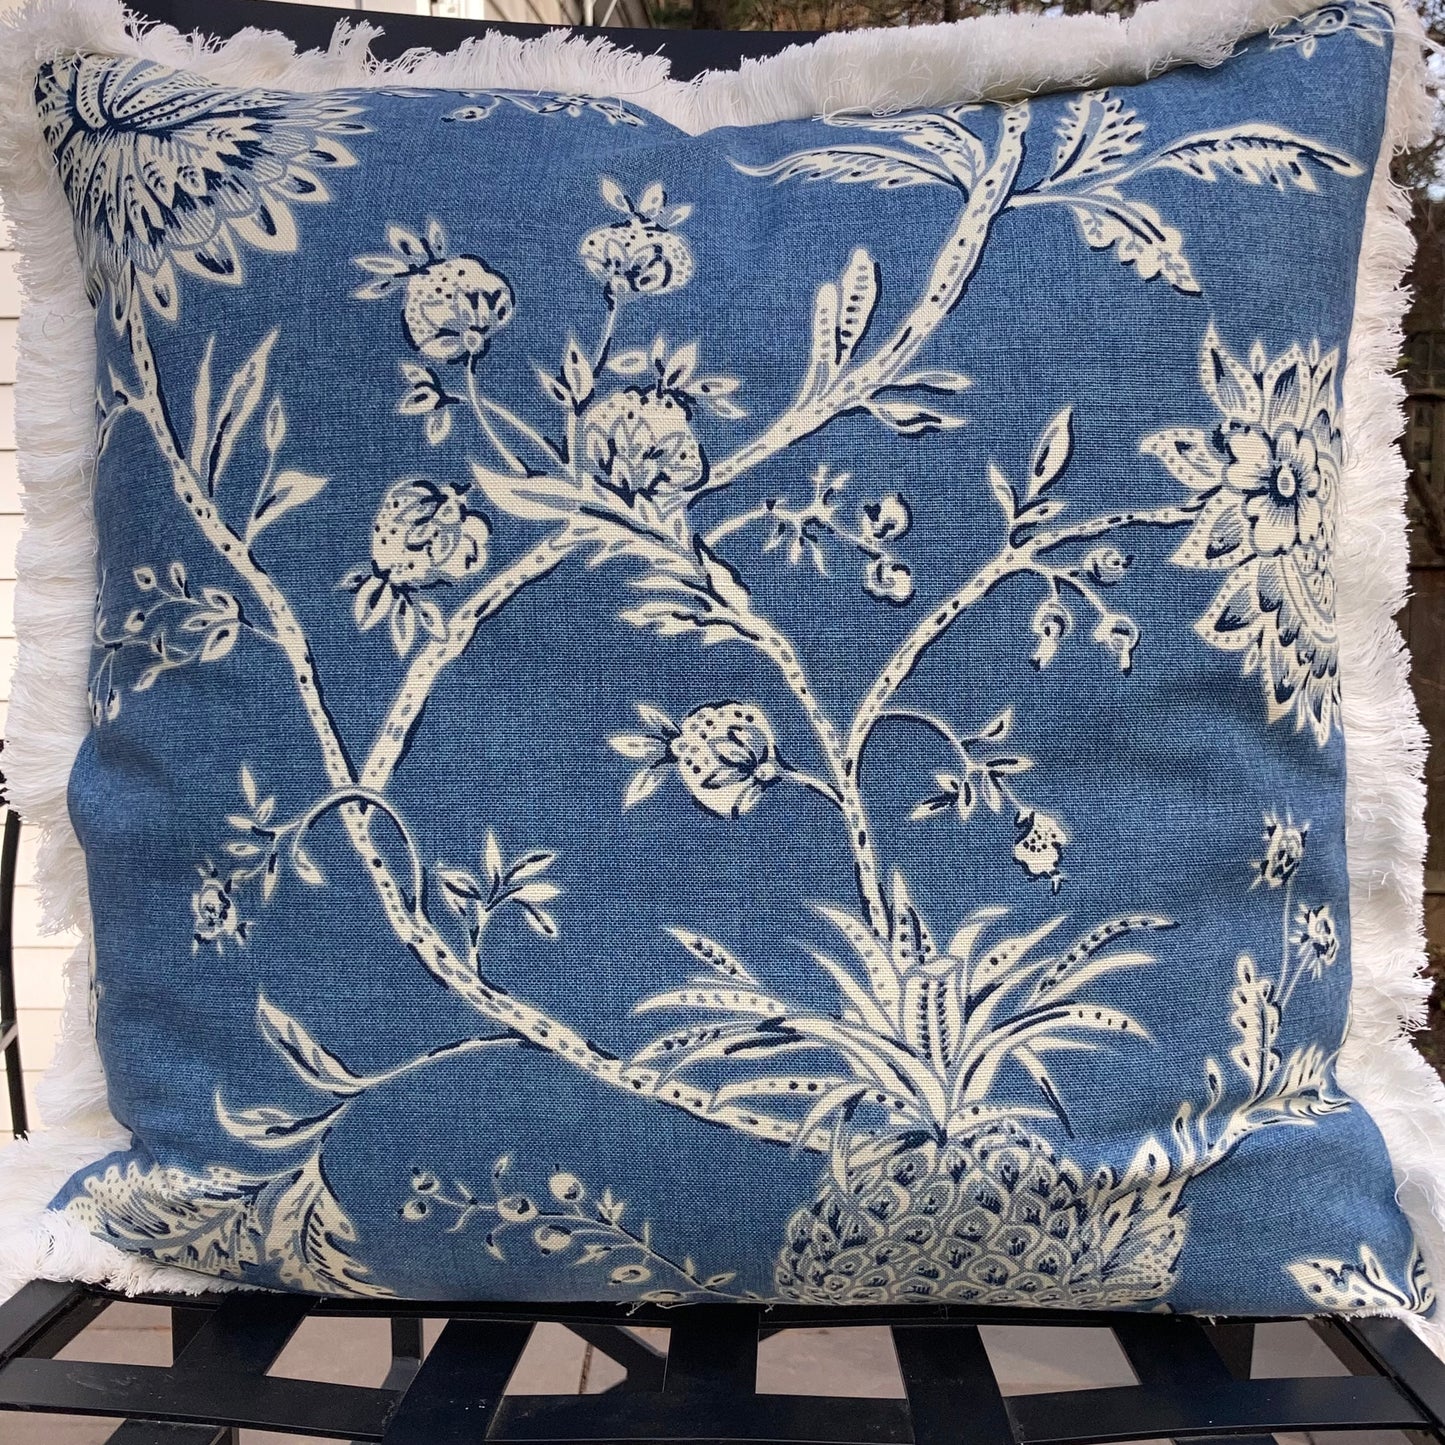 Bienvenue Tropical on Faded Denim Designer Pillow 21 X 21 Square Front with Down Feather Insert